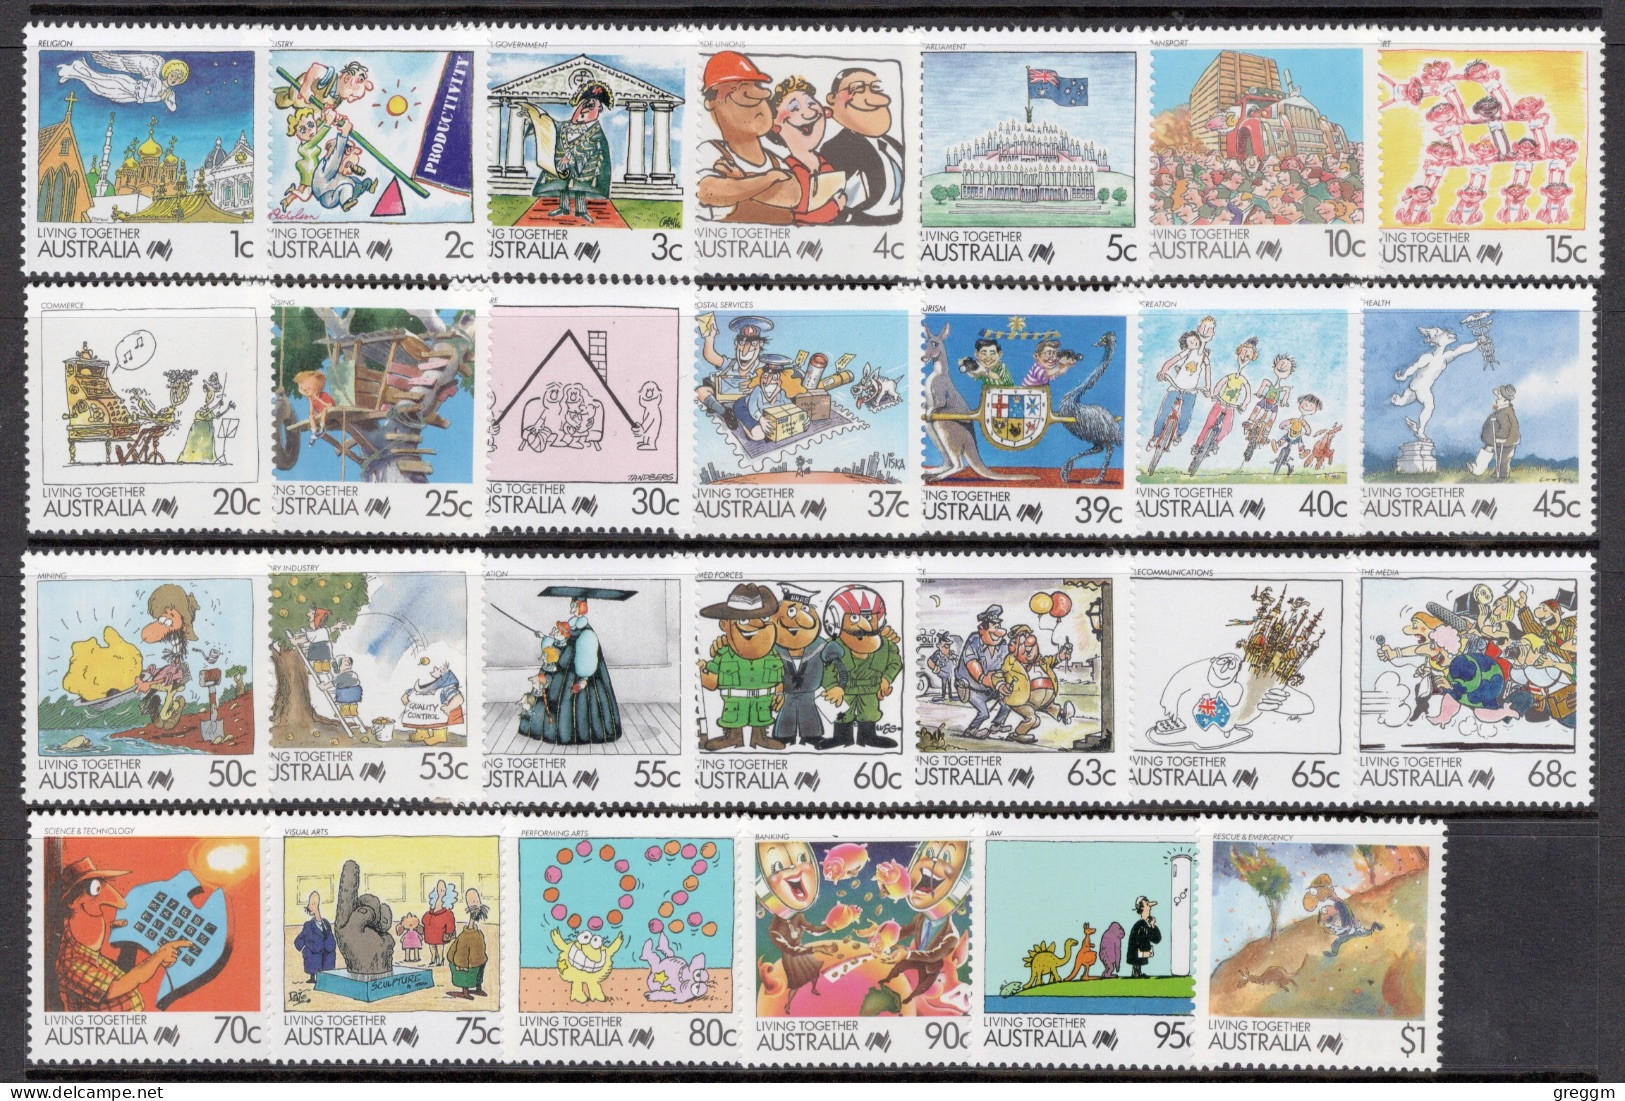 Australia 1988 Set Of Stamps - Living Together - Cartoons In Unmounted Mint - Mint Stamps